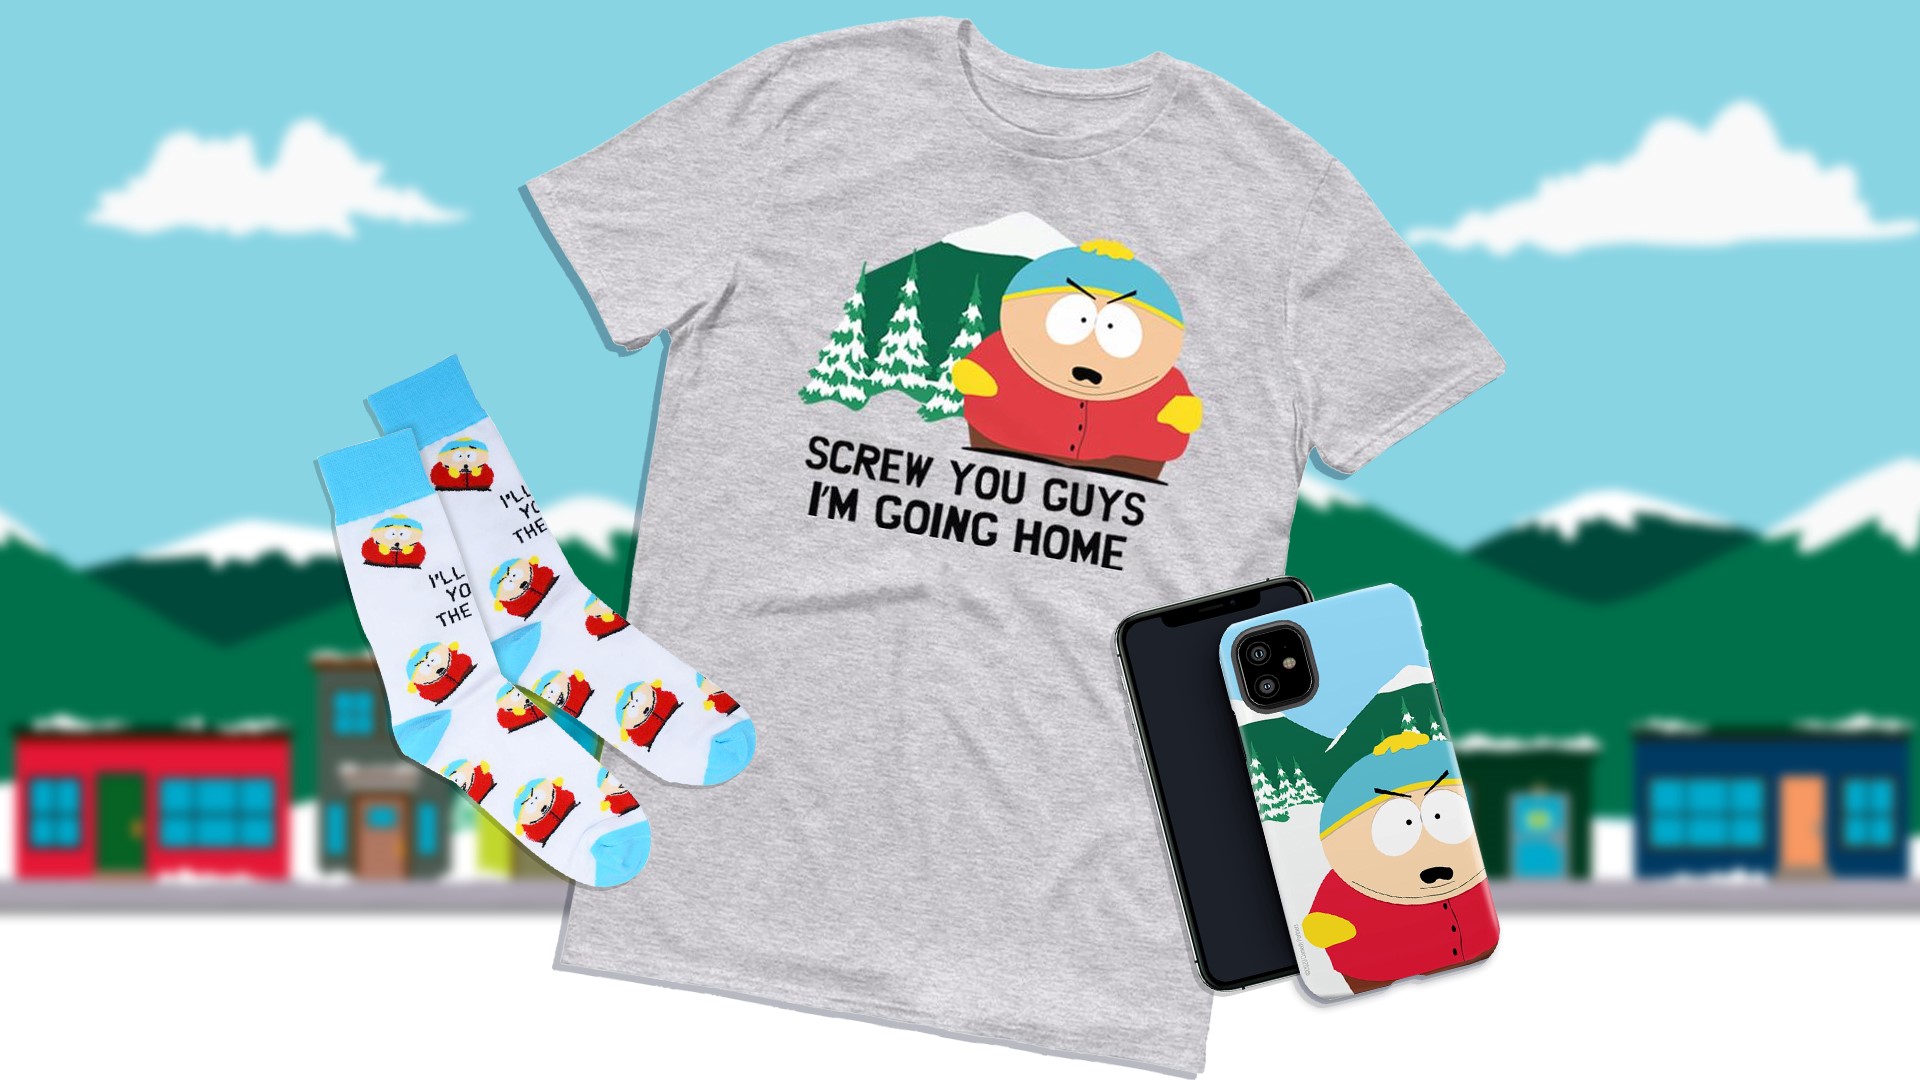 New Cartman Products - South Park